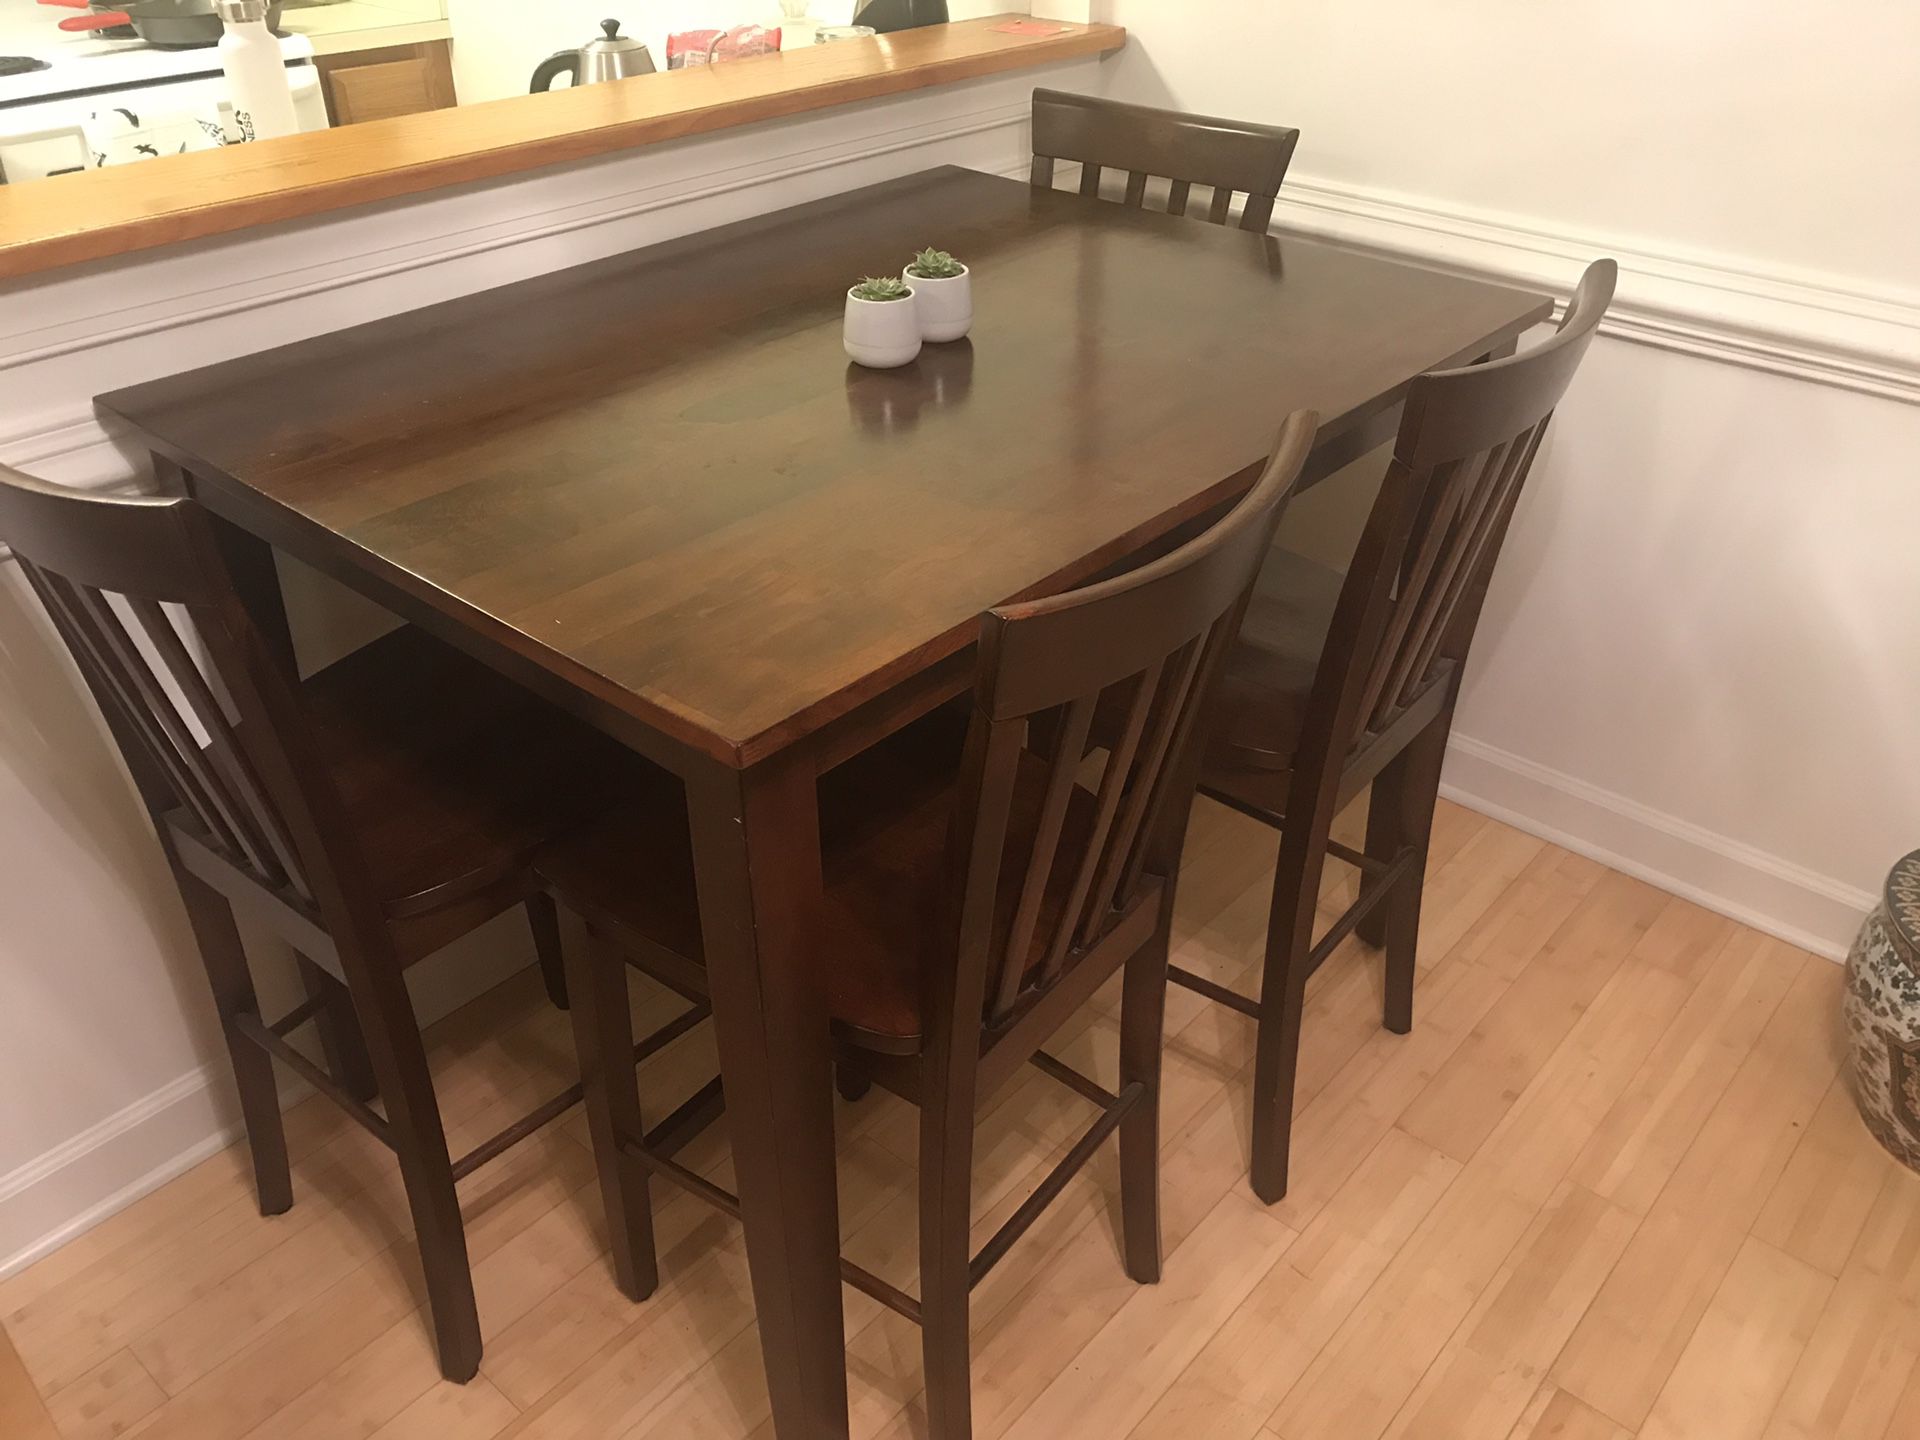 Gorgeous mahogany Kitchen table and chair set